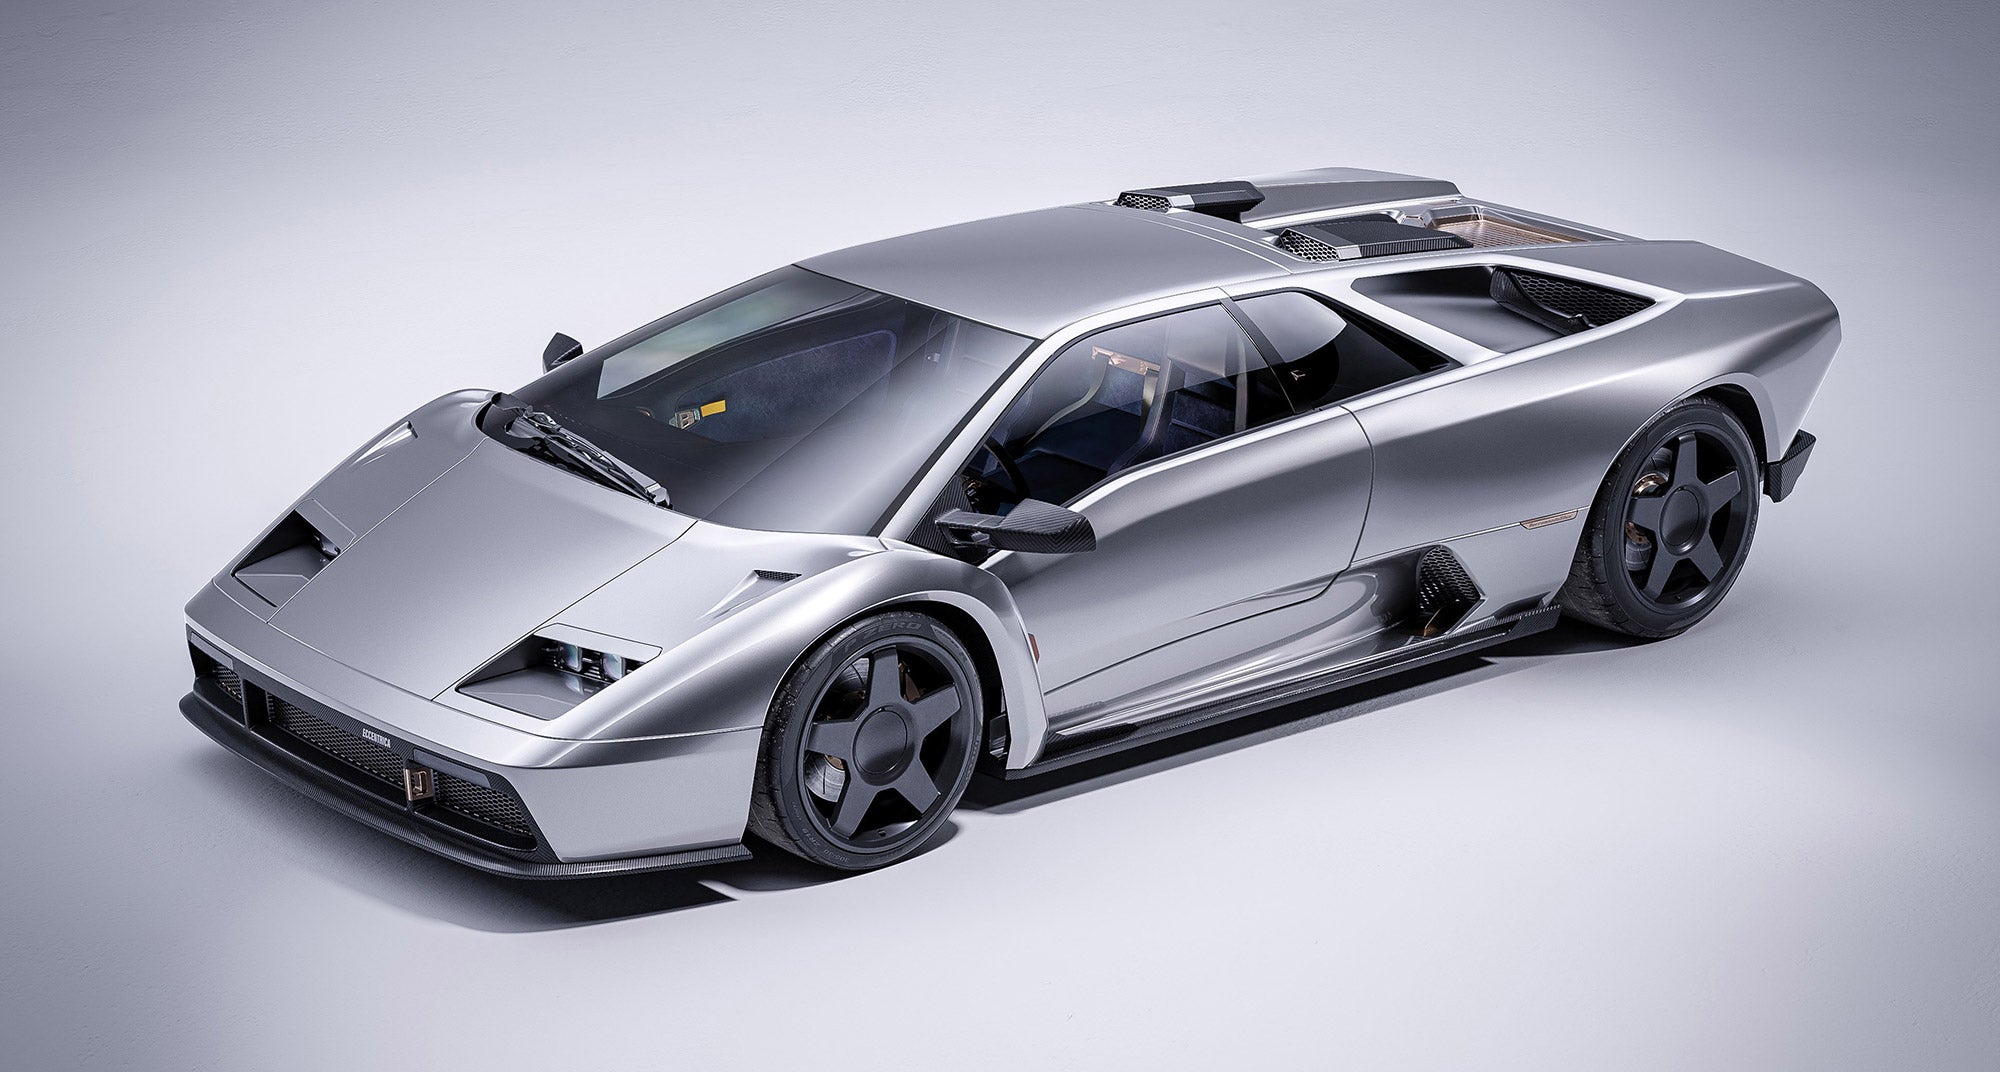 Somebody Influencer-ised the Lamborghini Diablo, for Better and Worse